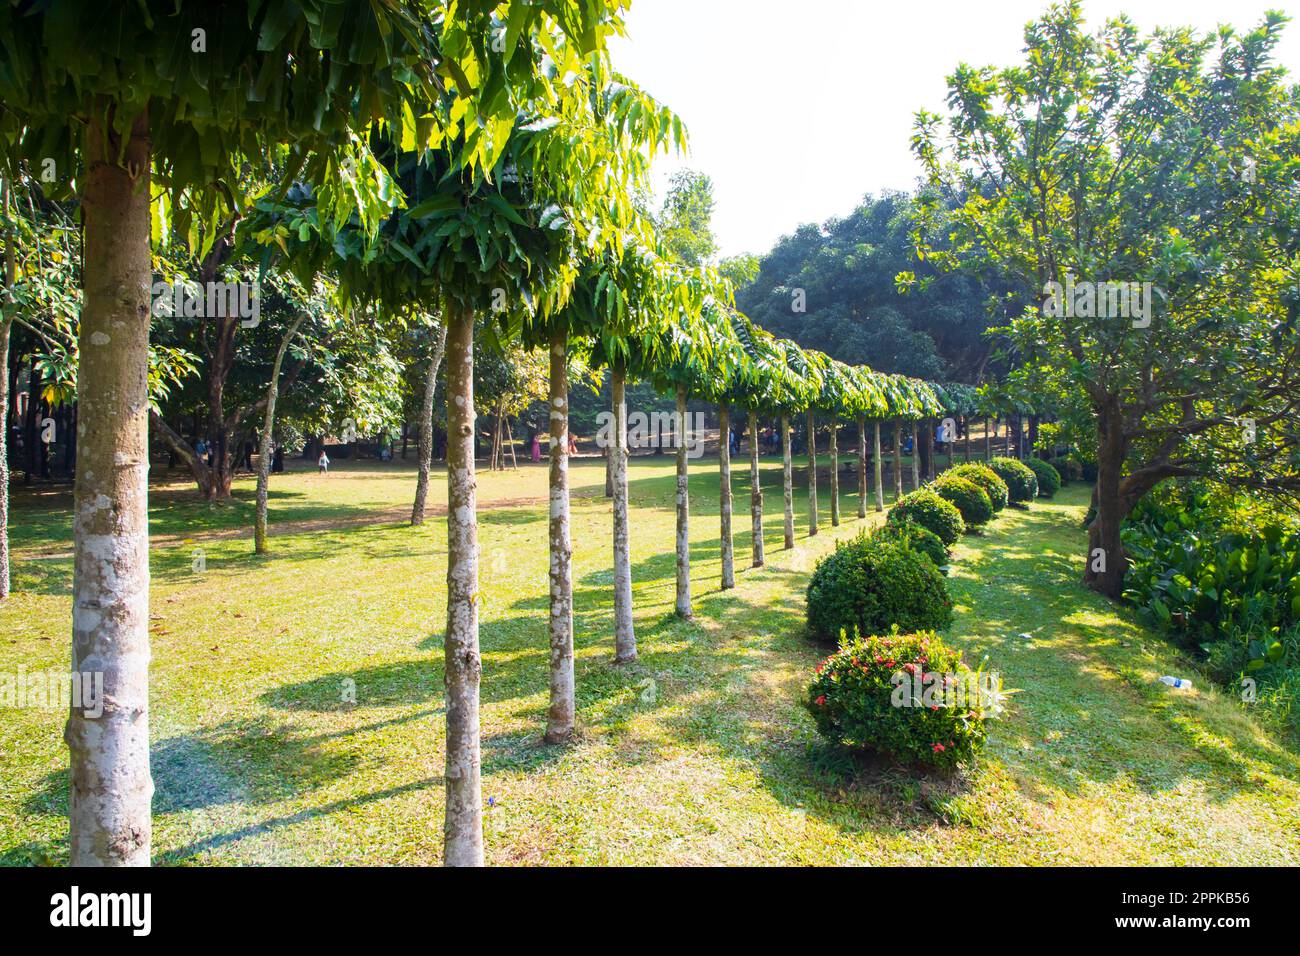 Green Field with trees in the park landscape view Stock Photo